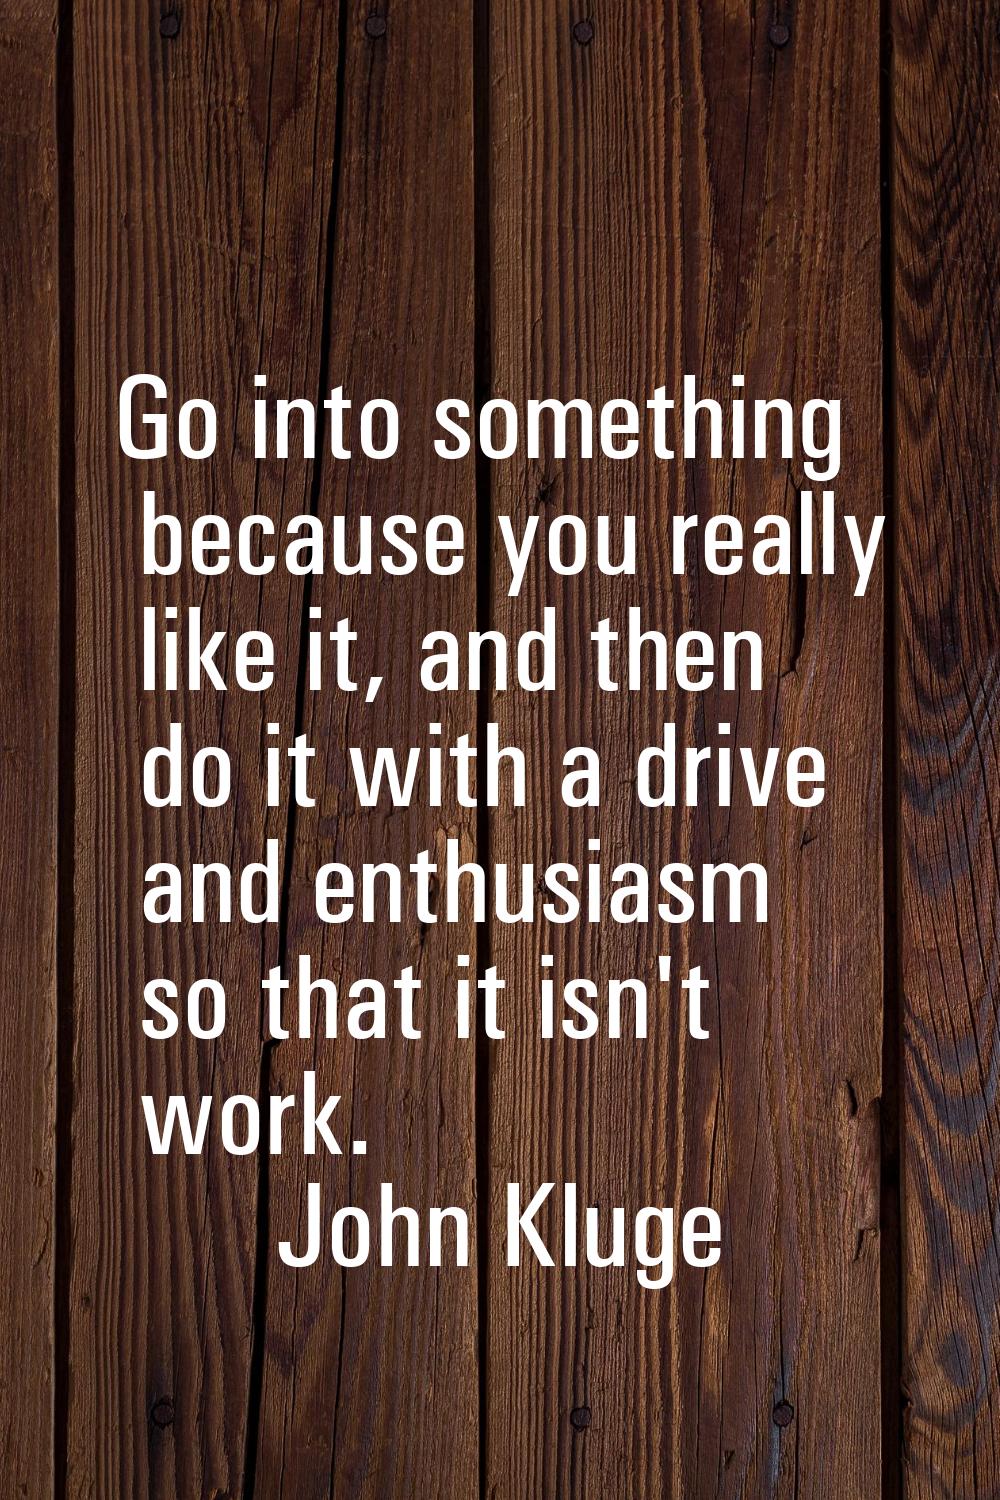 Go into something because you really like it, and then do it with a drive and enthusiasm so that it